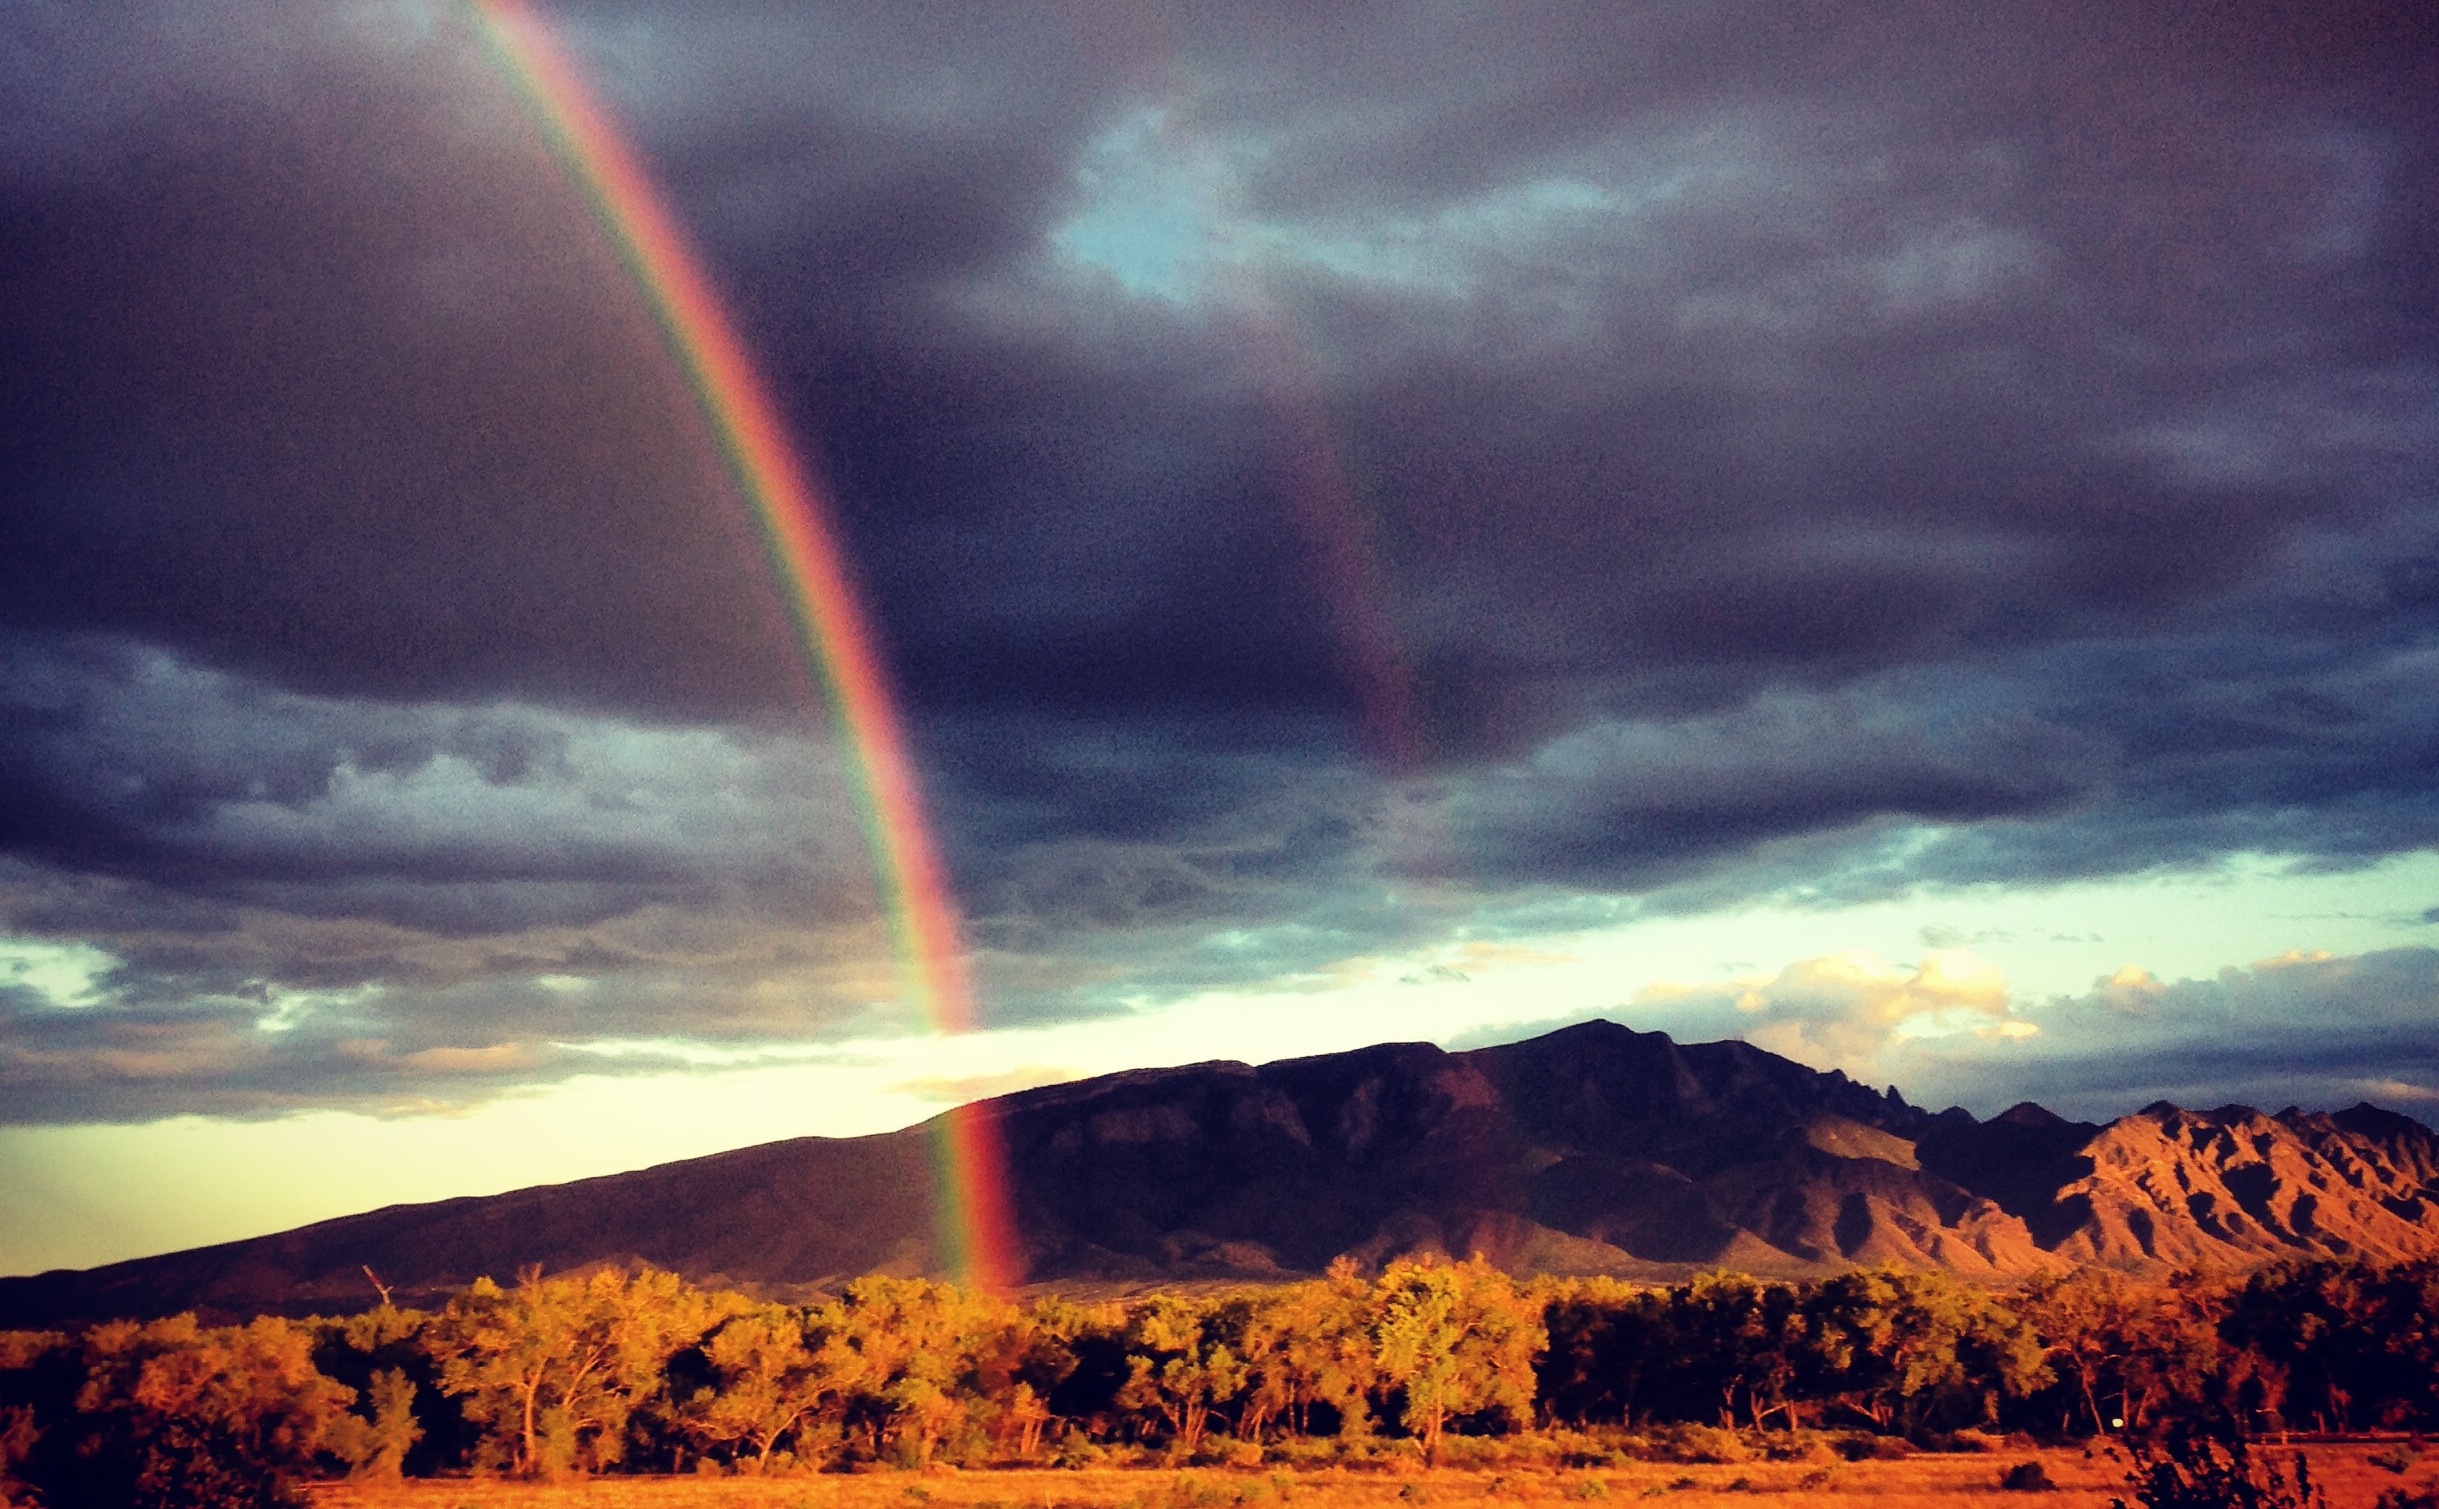 a photo of the mountains outside Albuquerque, New Mexico. above the mountains in the shadows of dusk sit dark clouds with flecks of light. in front of the mountains are desert trees and grass cast in a ghostly yellow-brown. somewhere between the viewer and the scrub trees, a rainbow floats in the ether. near the center of the image is a second rainbow, barely visible, but perhaps the thing that made this scene so special.